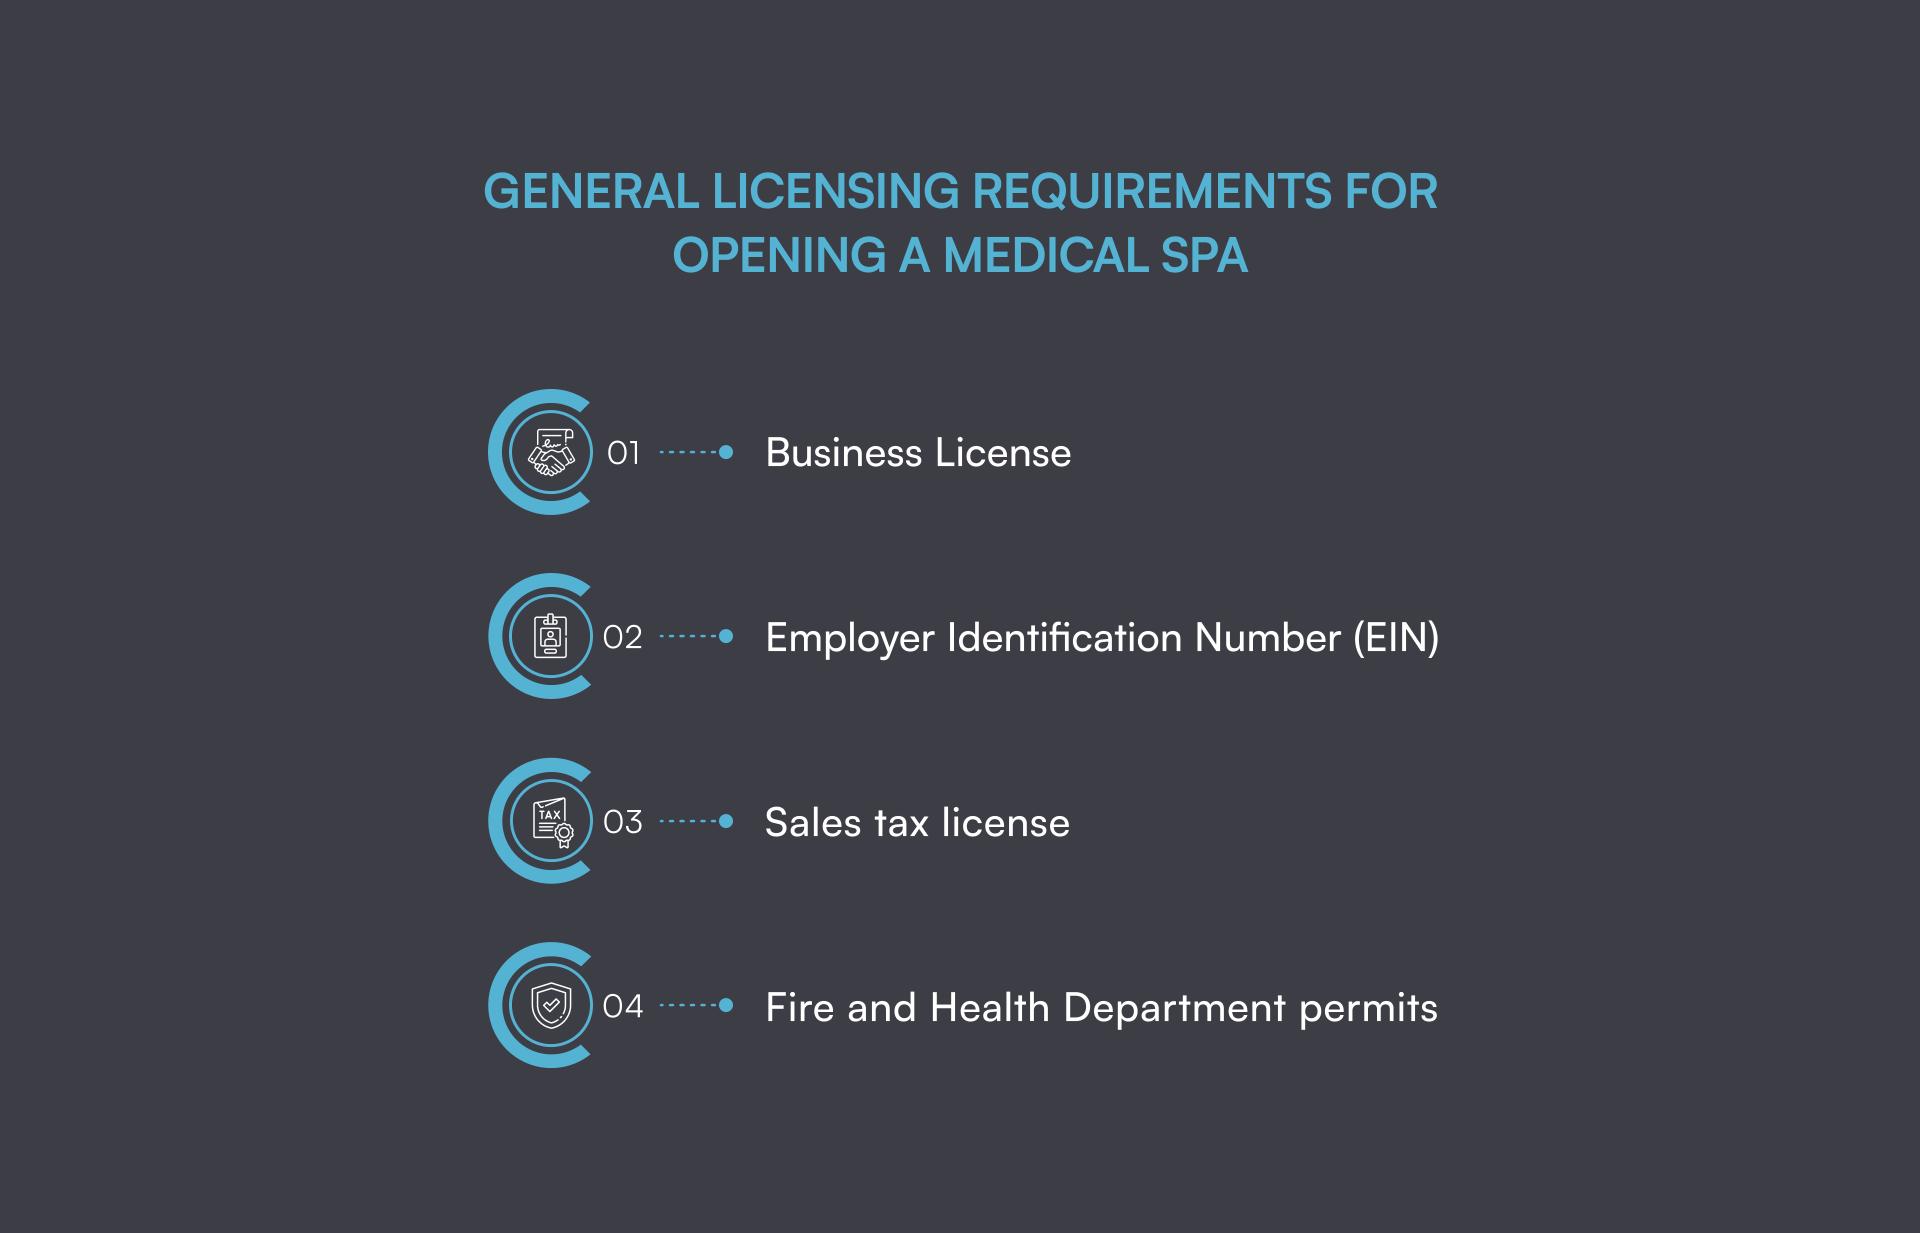 General licensing requirements for opening a medical spa